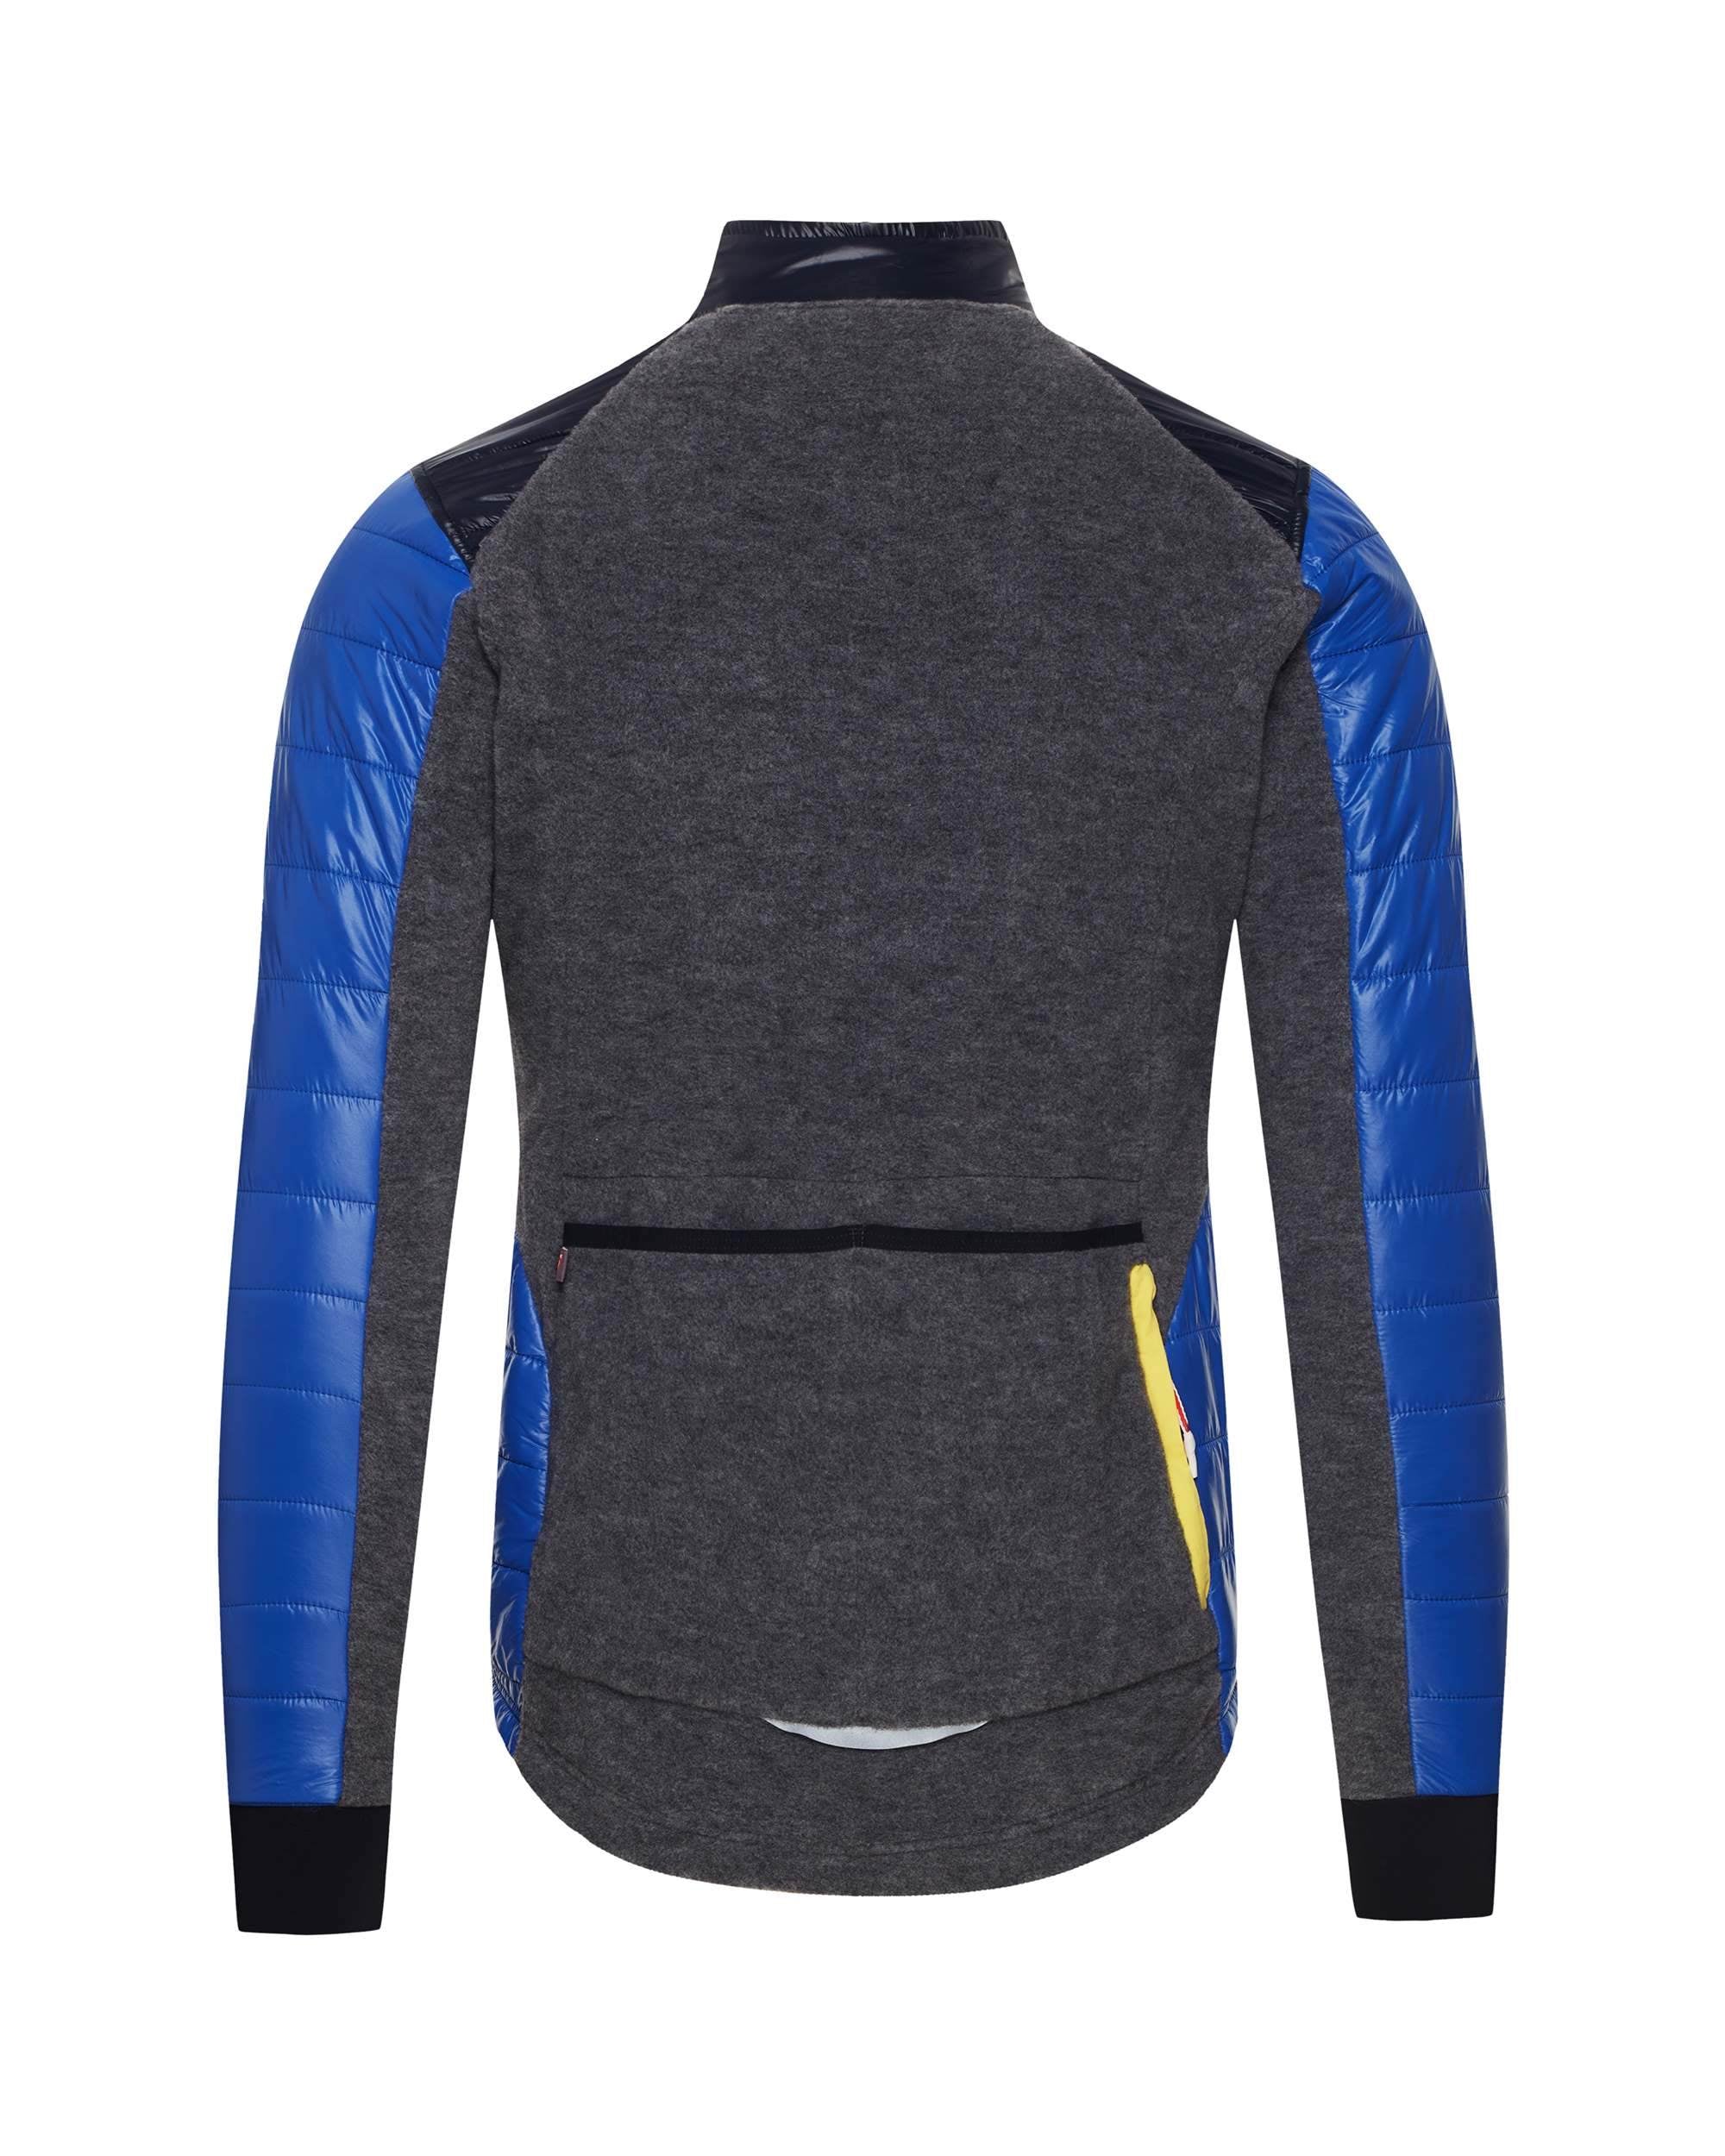 Albertine Thermal Cycling Jacket – DSTNC